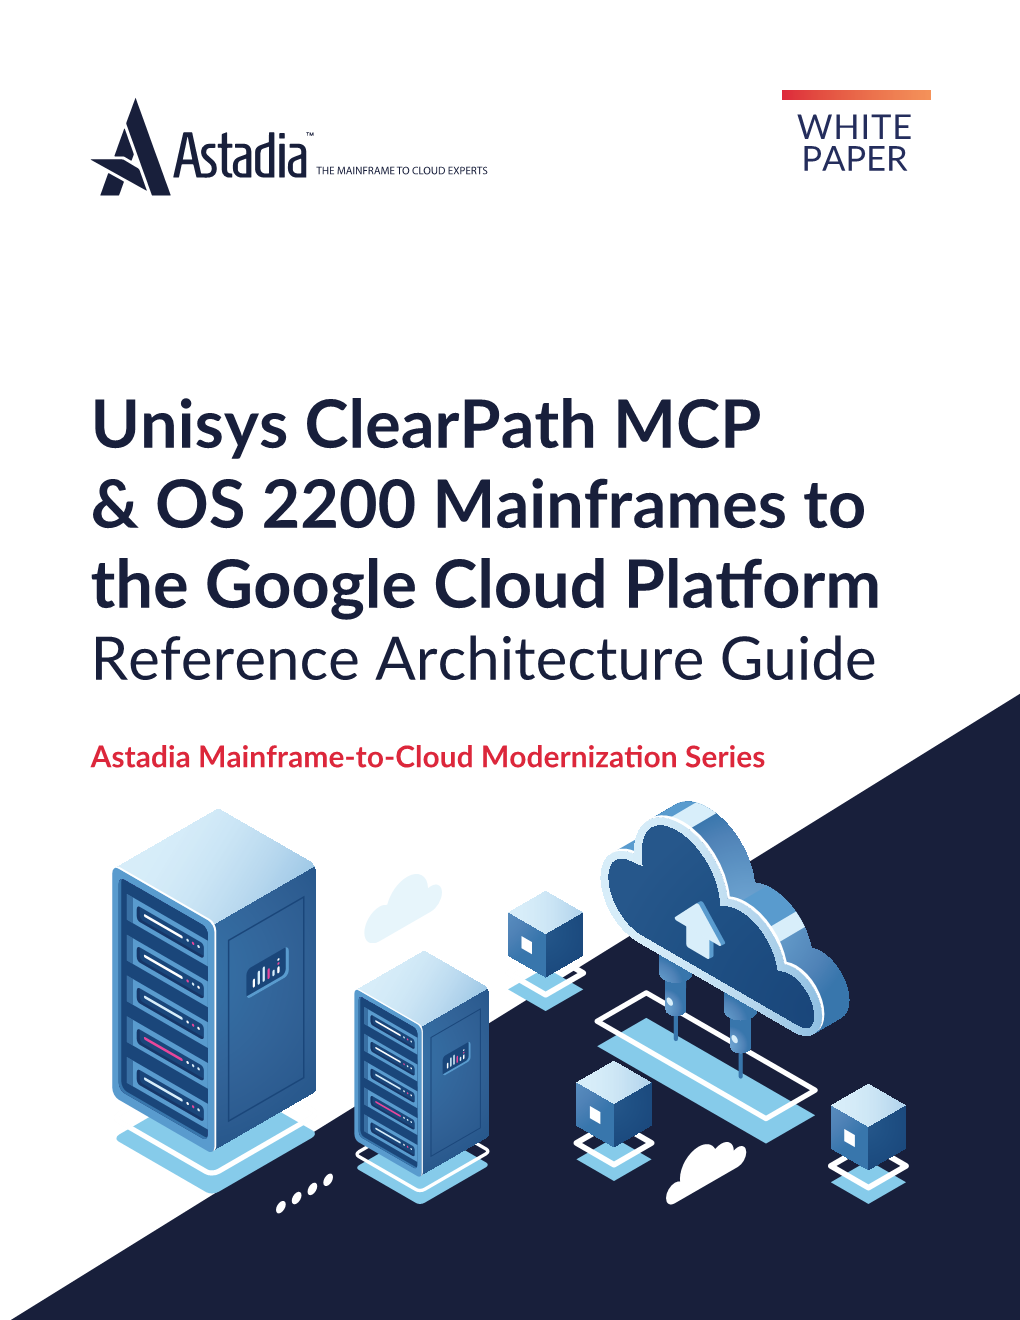 Unisys Clearpath MCP & OS 2200 Mainframes to the Google Cloud Platform